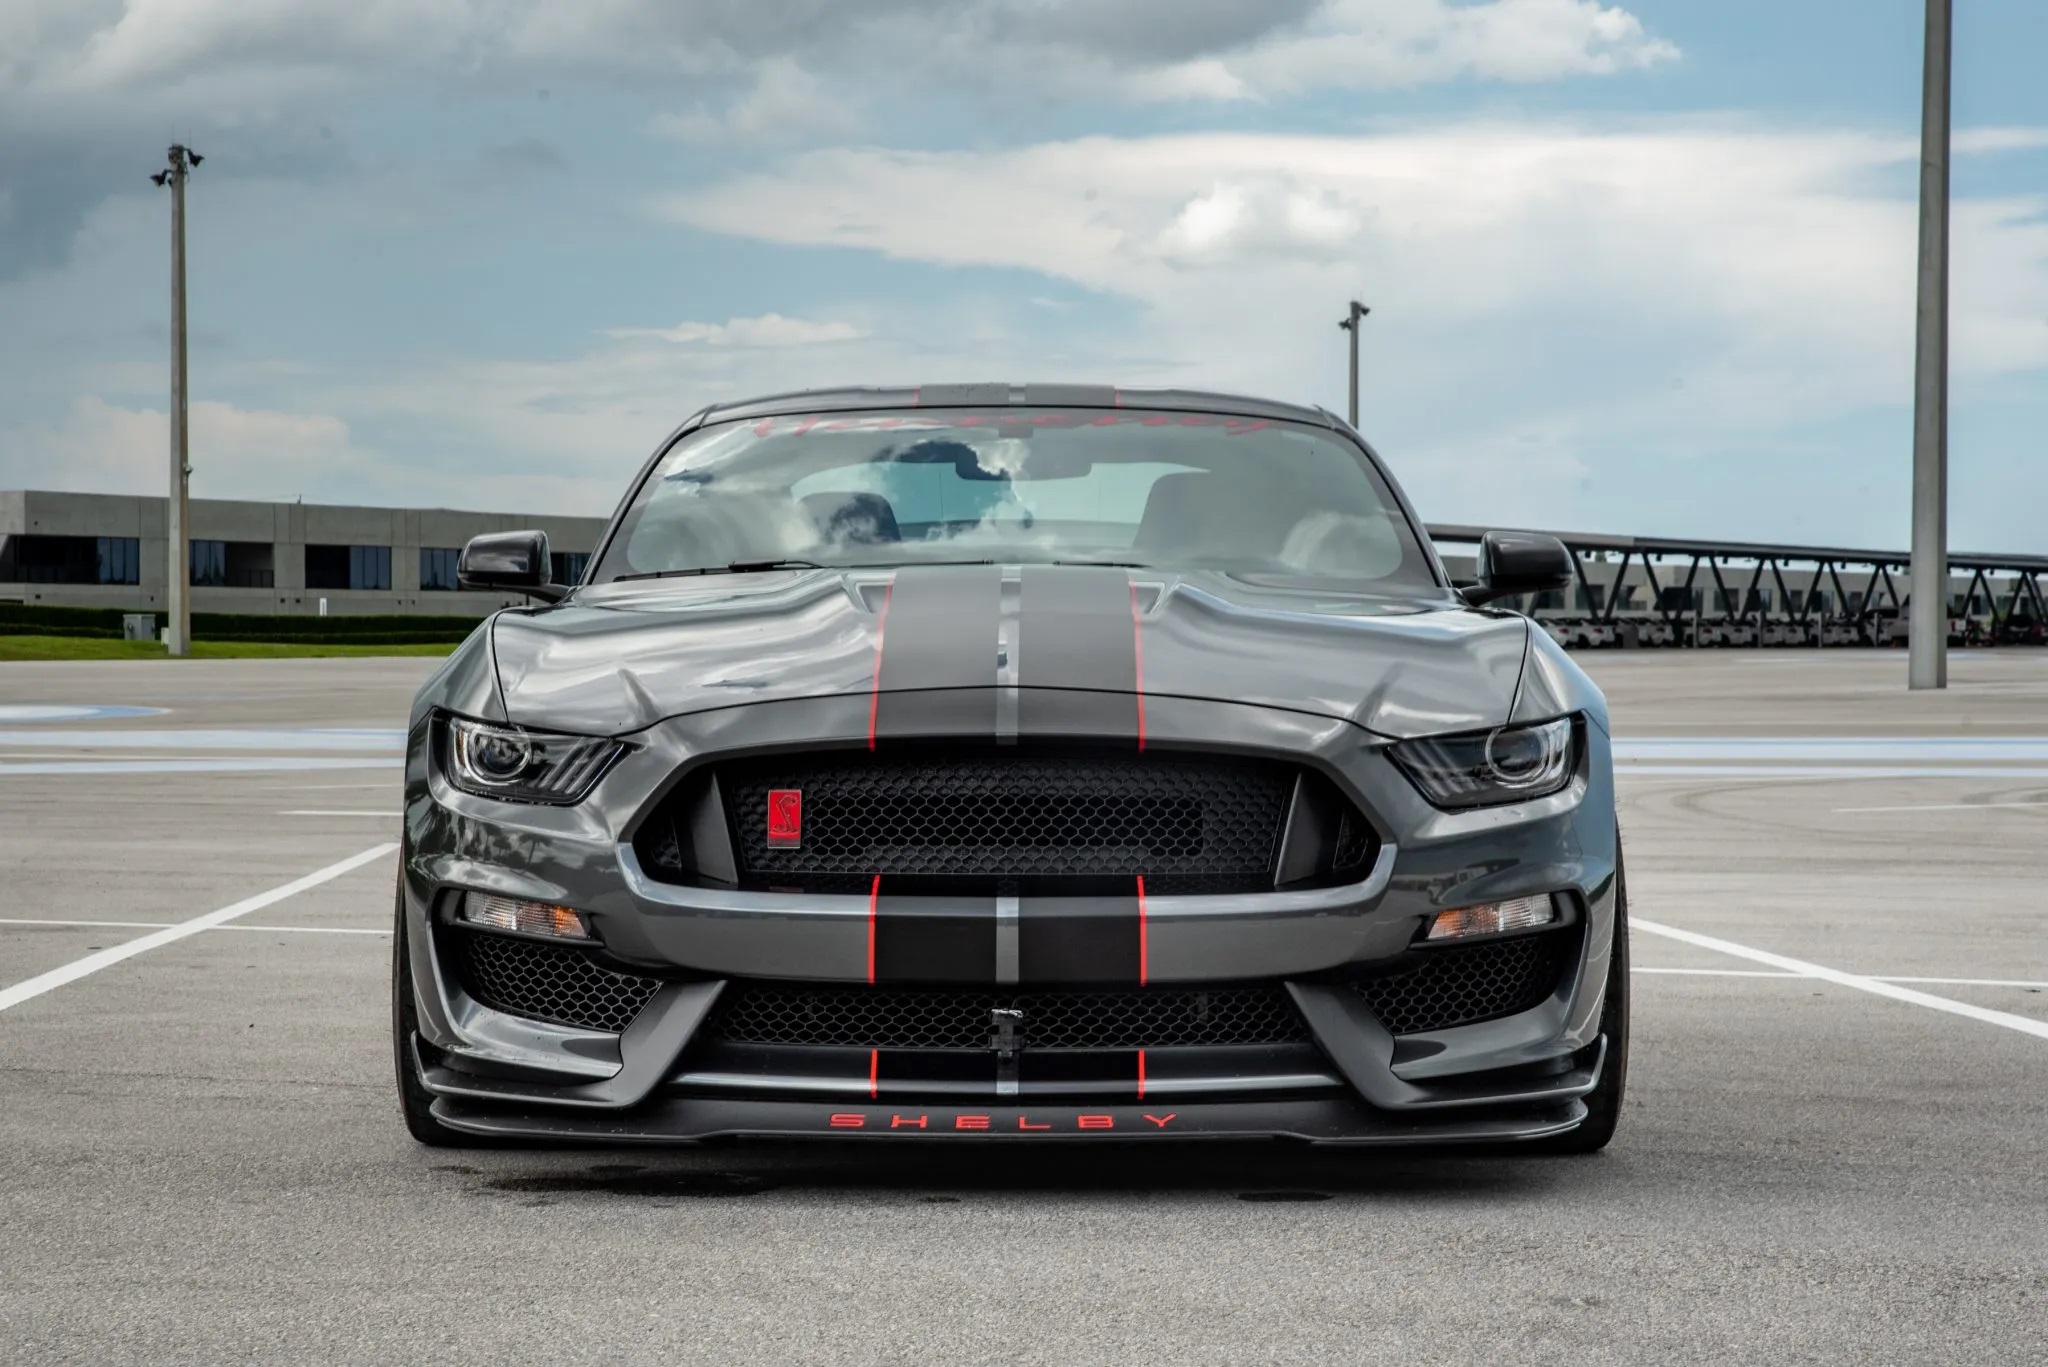 2019 Ford Mustang Shelby GT350R Hennessey HPE850